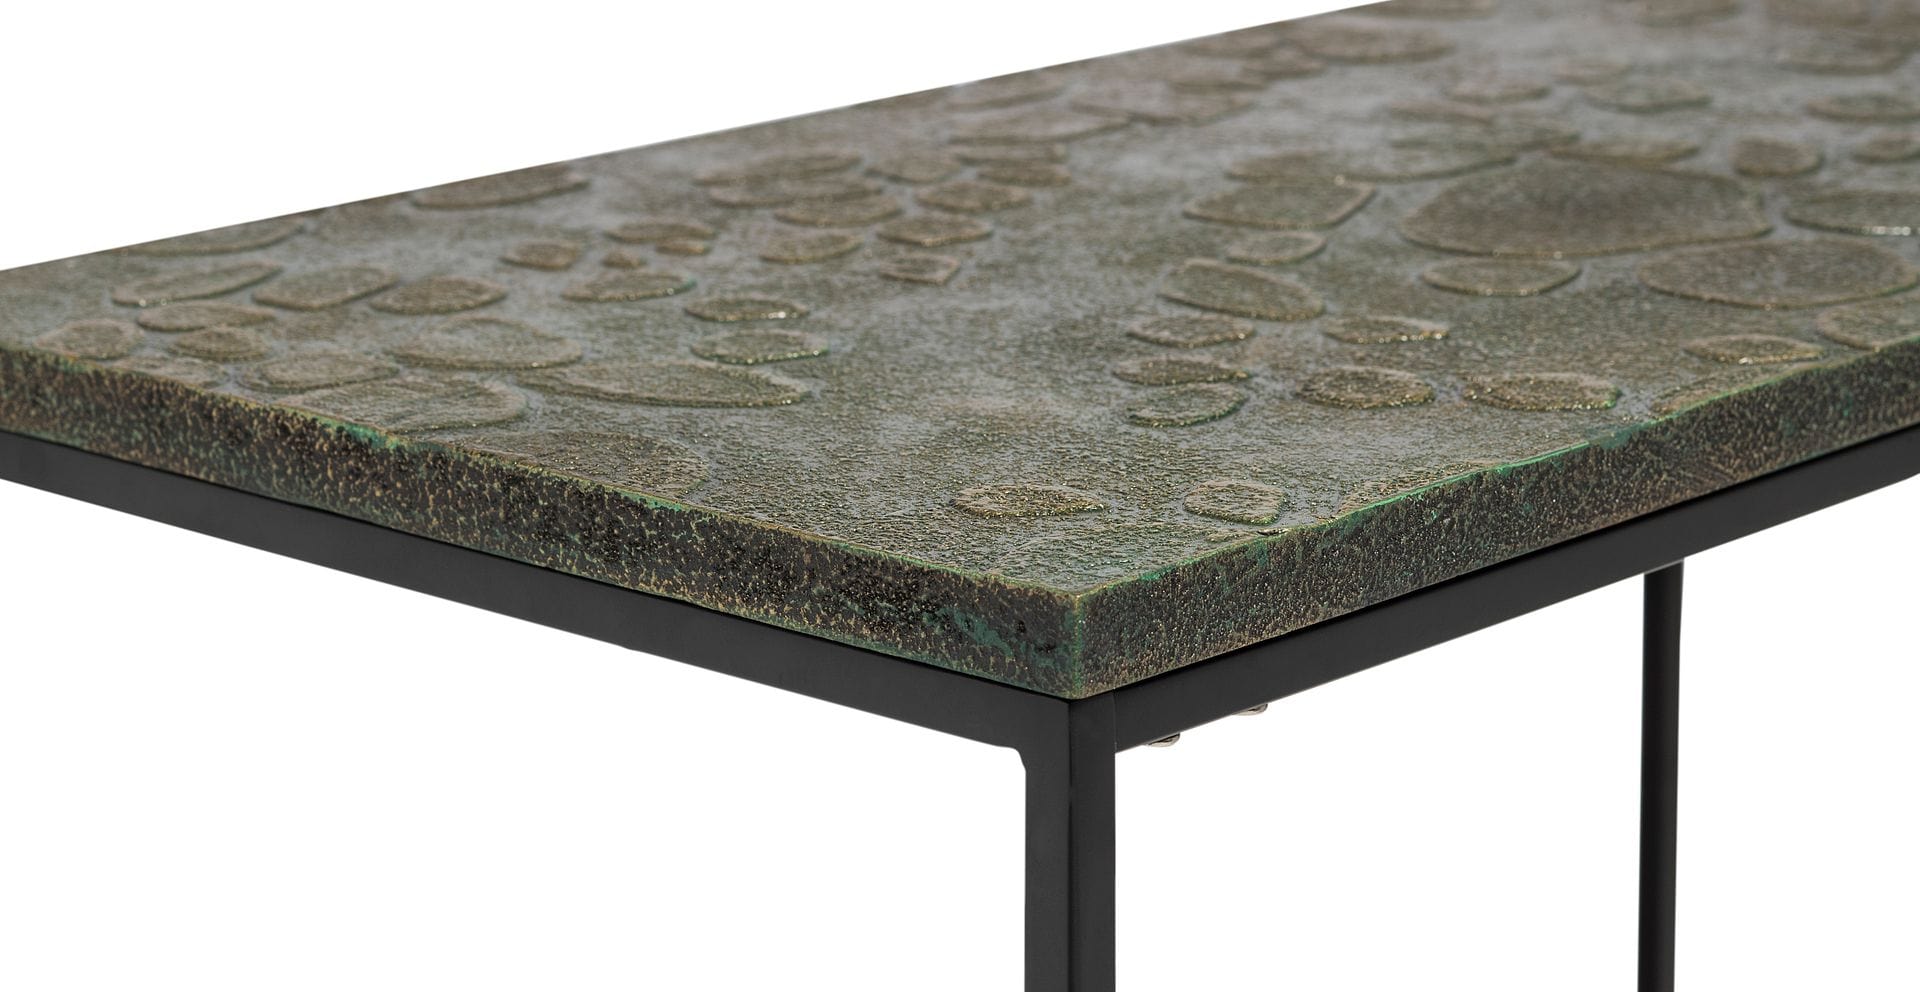 Stylish Black Sofa Side Table with Textured Wood Top